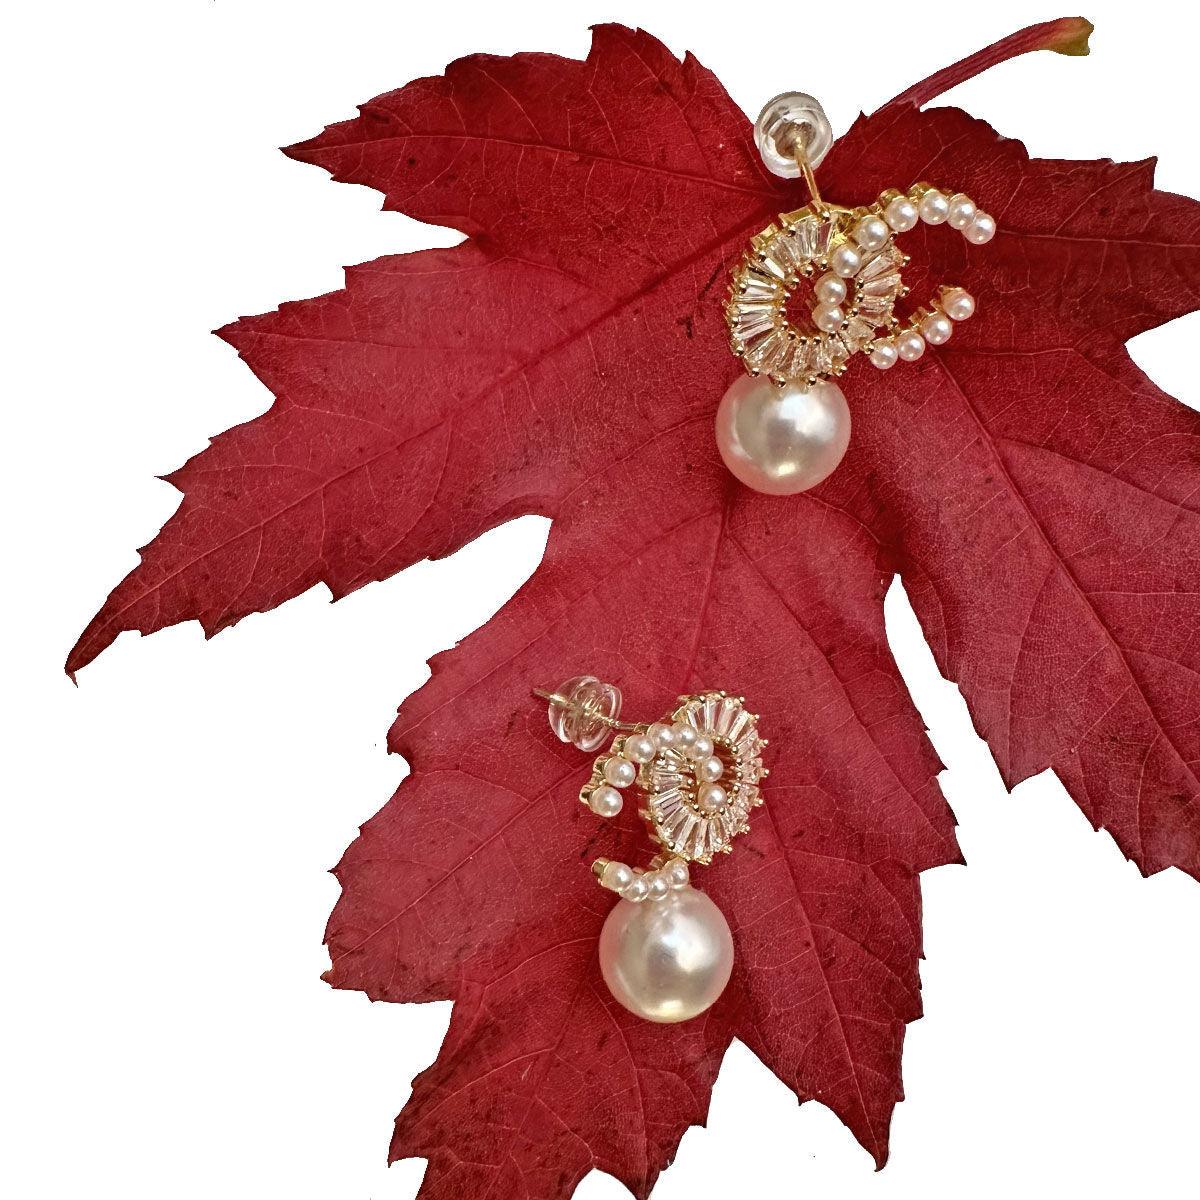 Fashion Jewelry: Gorgeous CZ Drop Pearl Earrings in Gold Finish